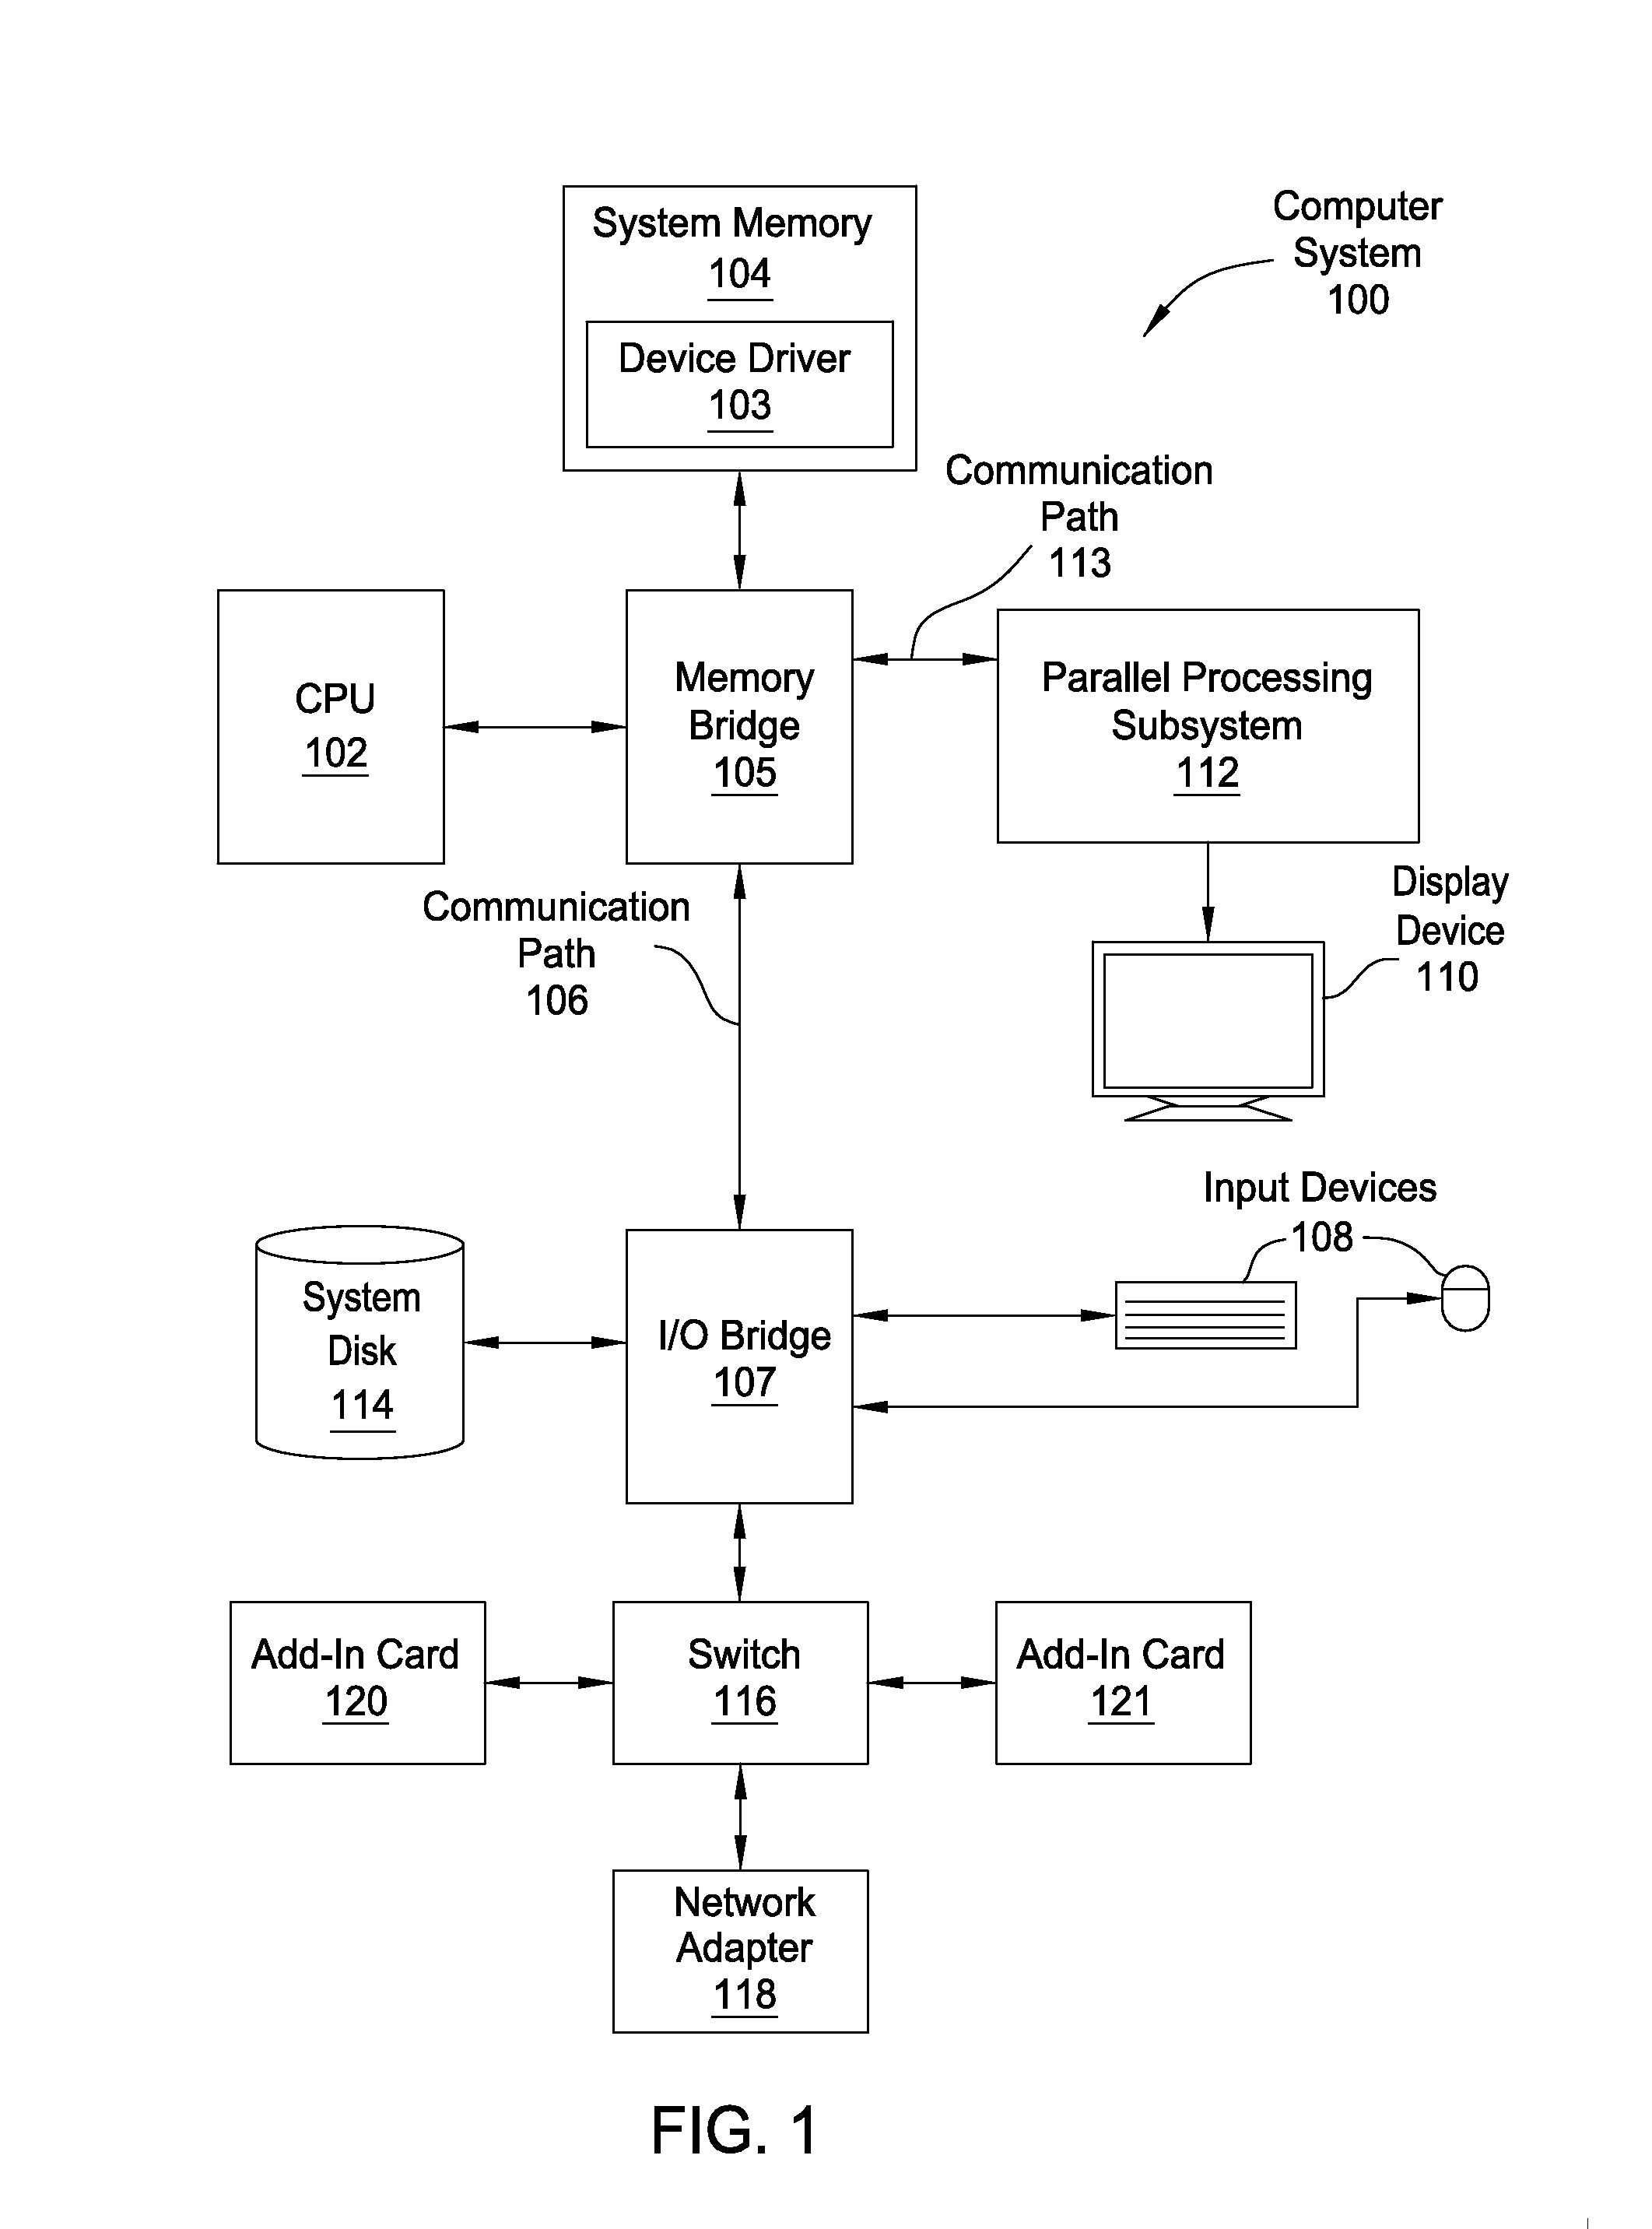 Managing deferred contexts in a cache tiling architecture